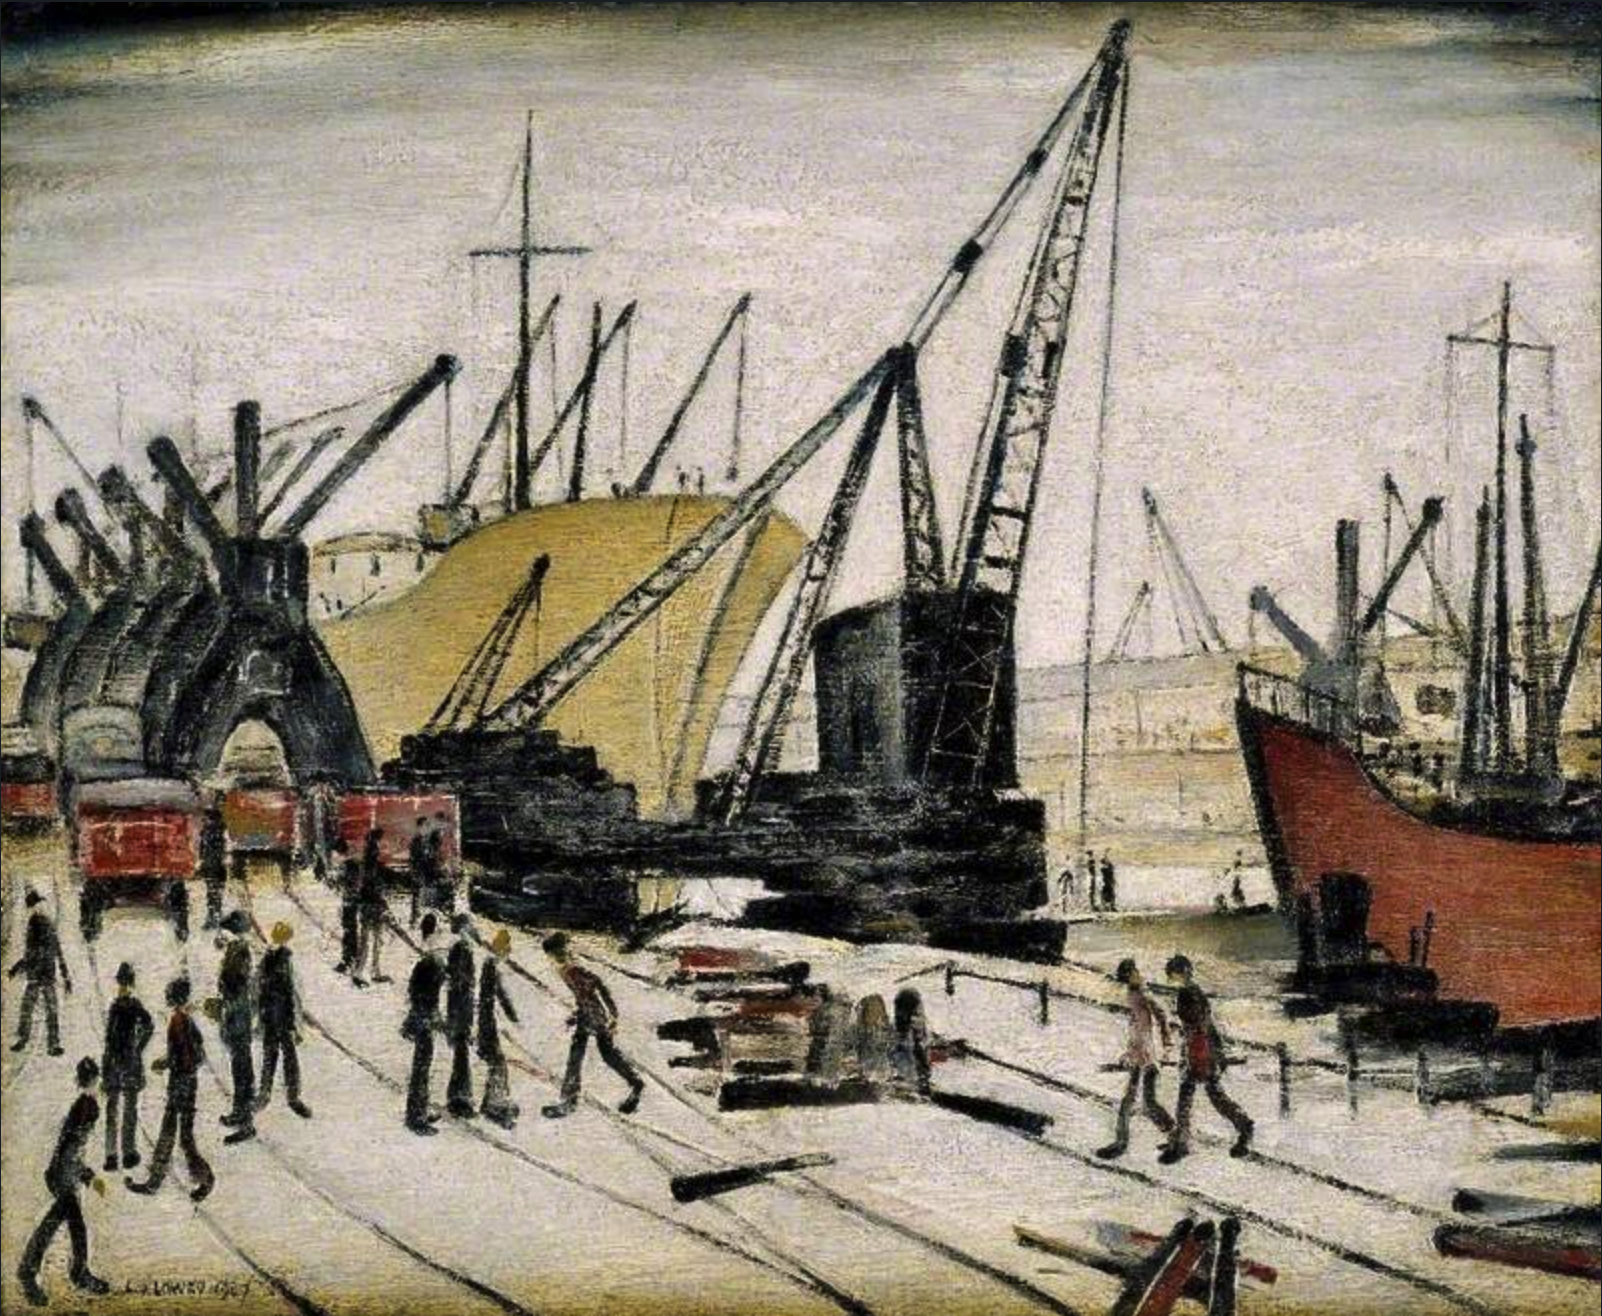 Crane and Ships, Glasgow Docks (1947) by Laurence Stephen Lowry (1887 - 1976), English artist.